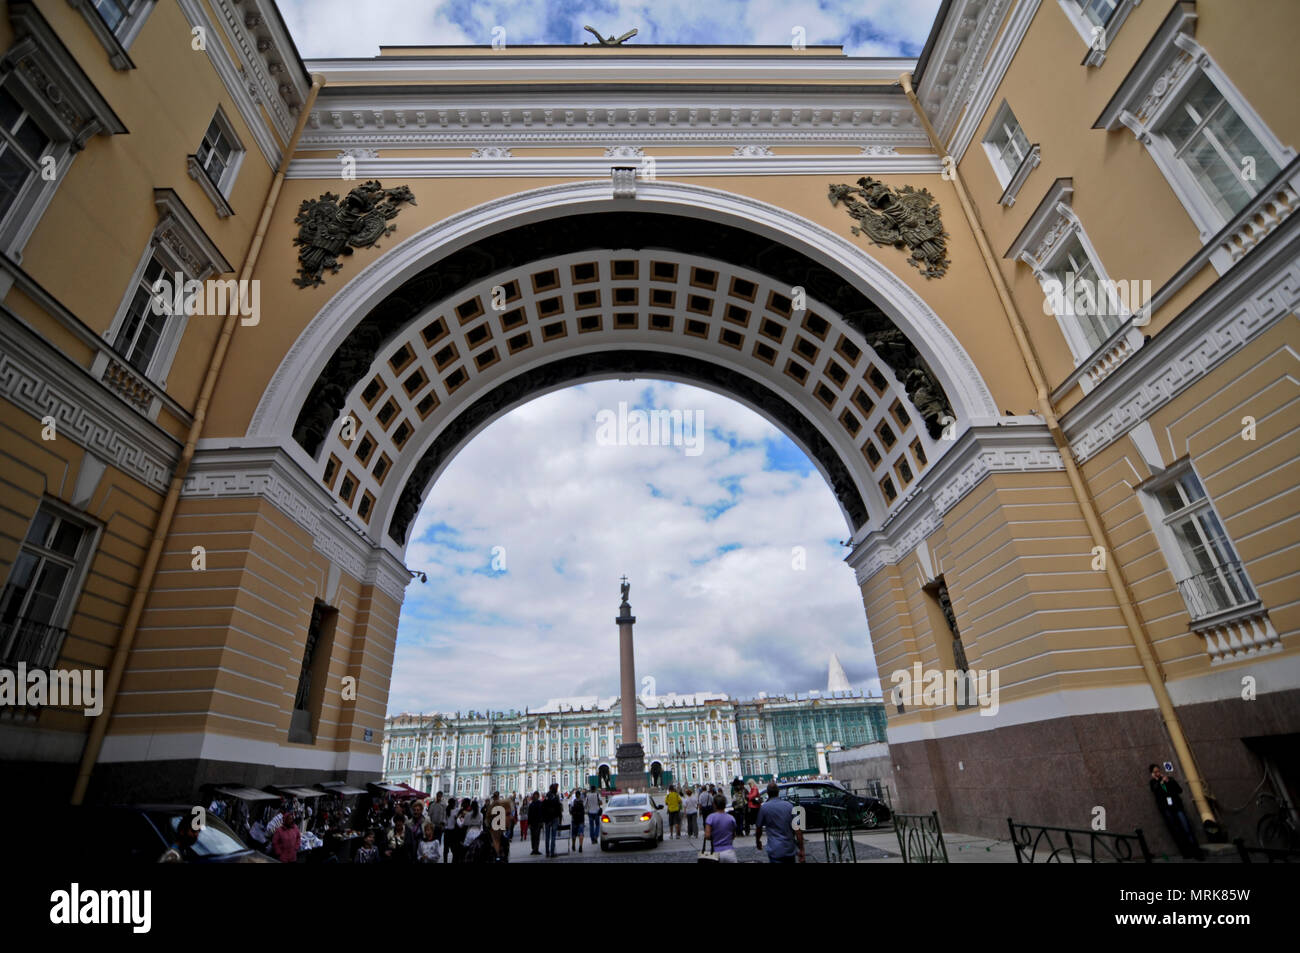 General Staff Building - Palace Square, Saint Petersburg, Russia Stock Photo